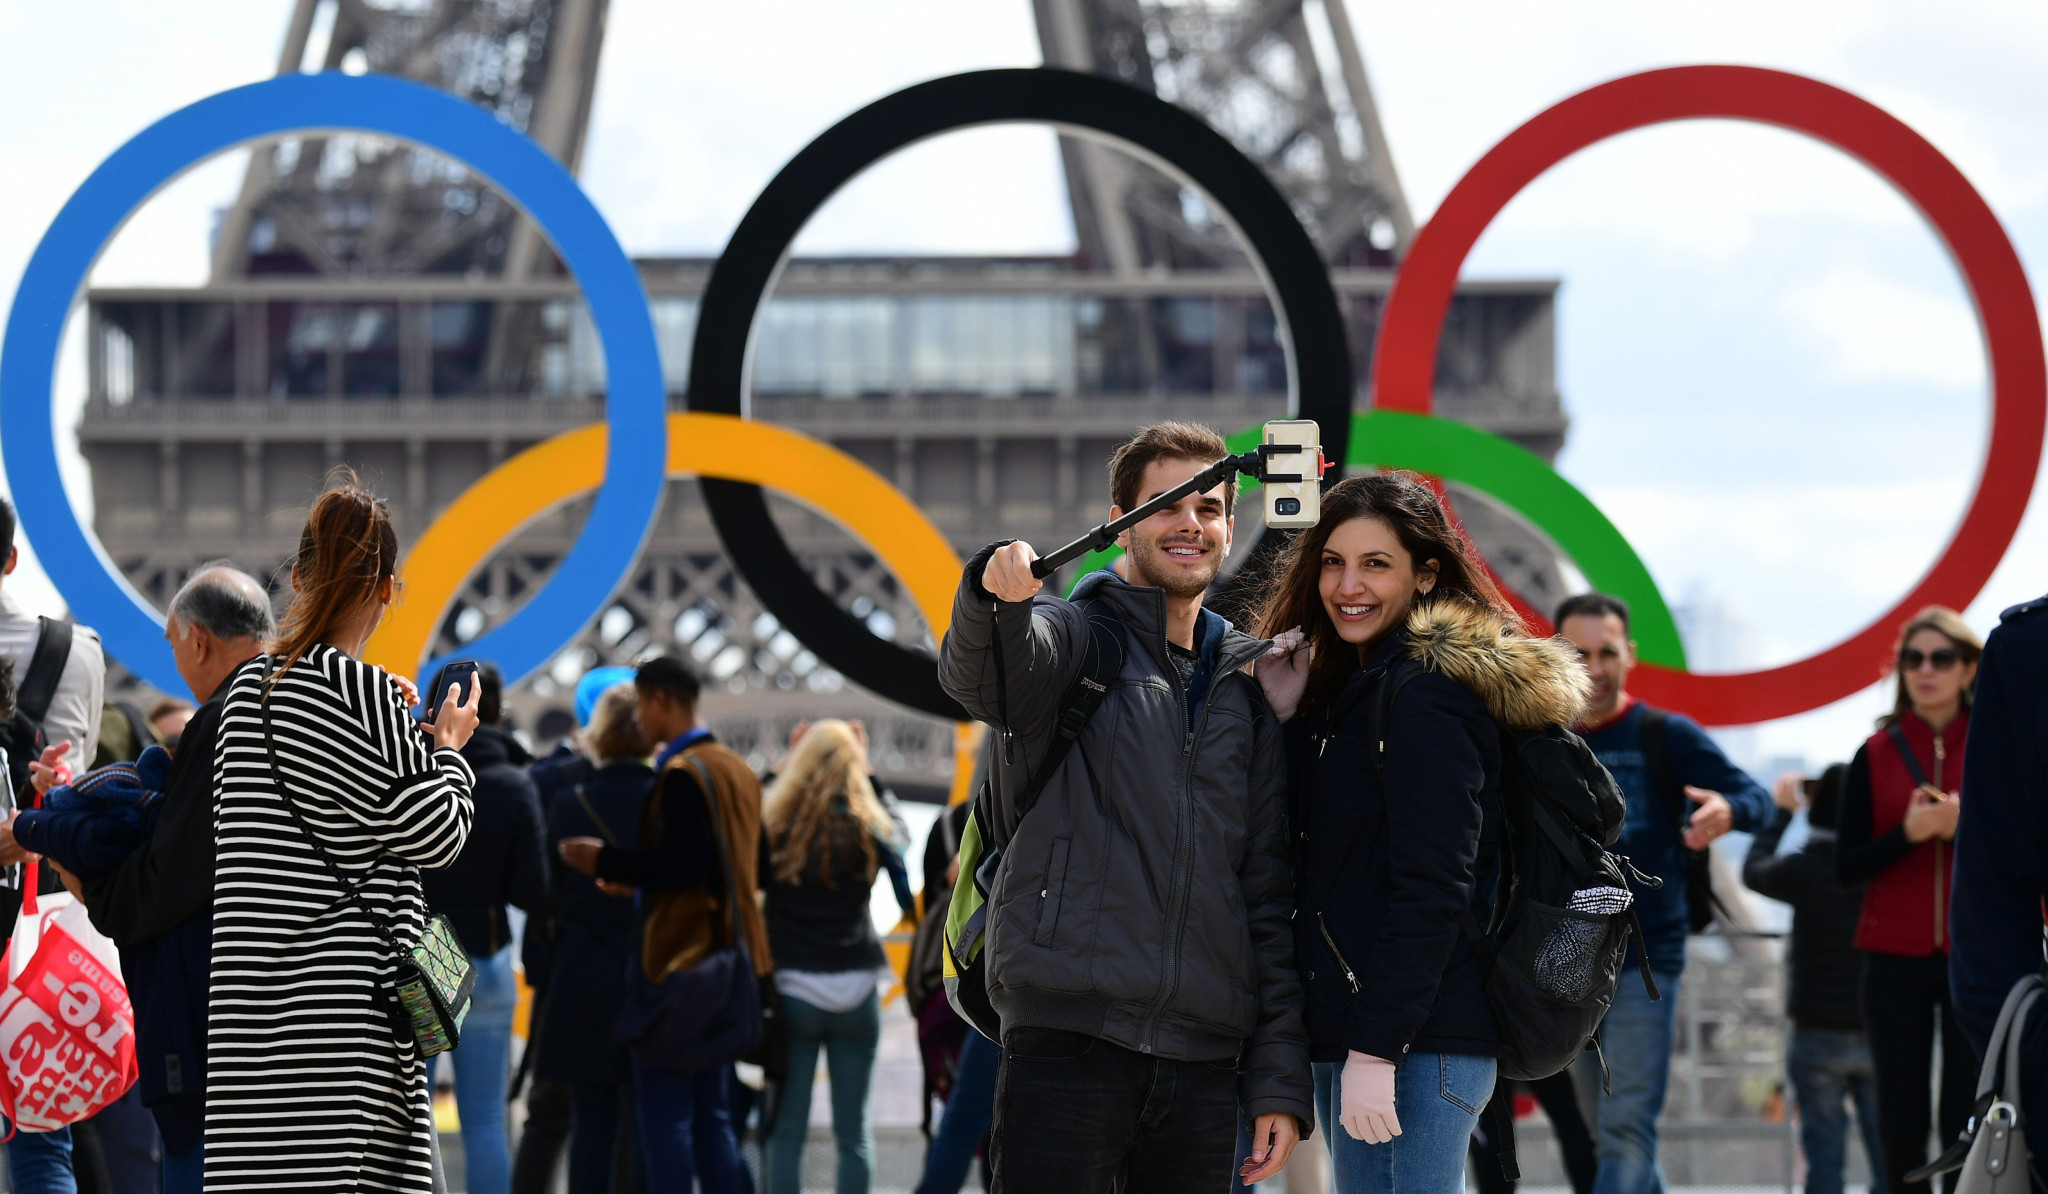 France is looking to put in measures to response to an increase in tourism during the Paris 2024 Olympics ©Getty Images